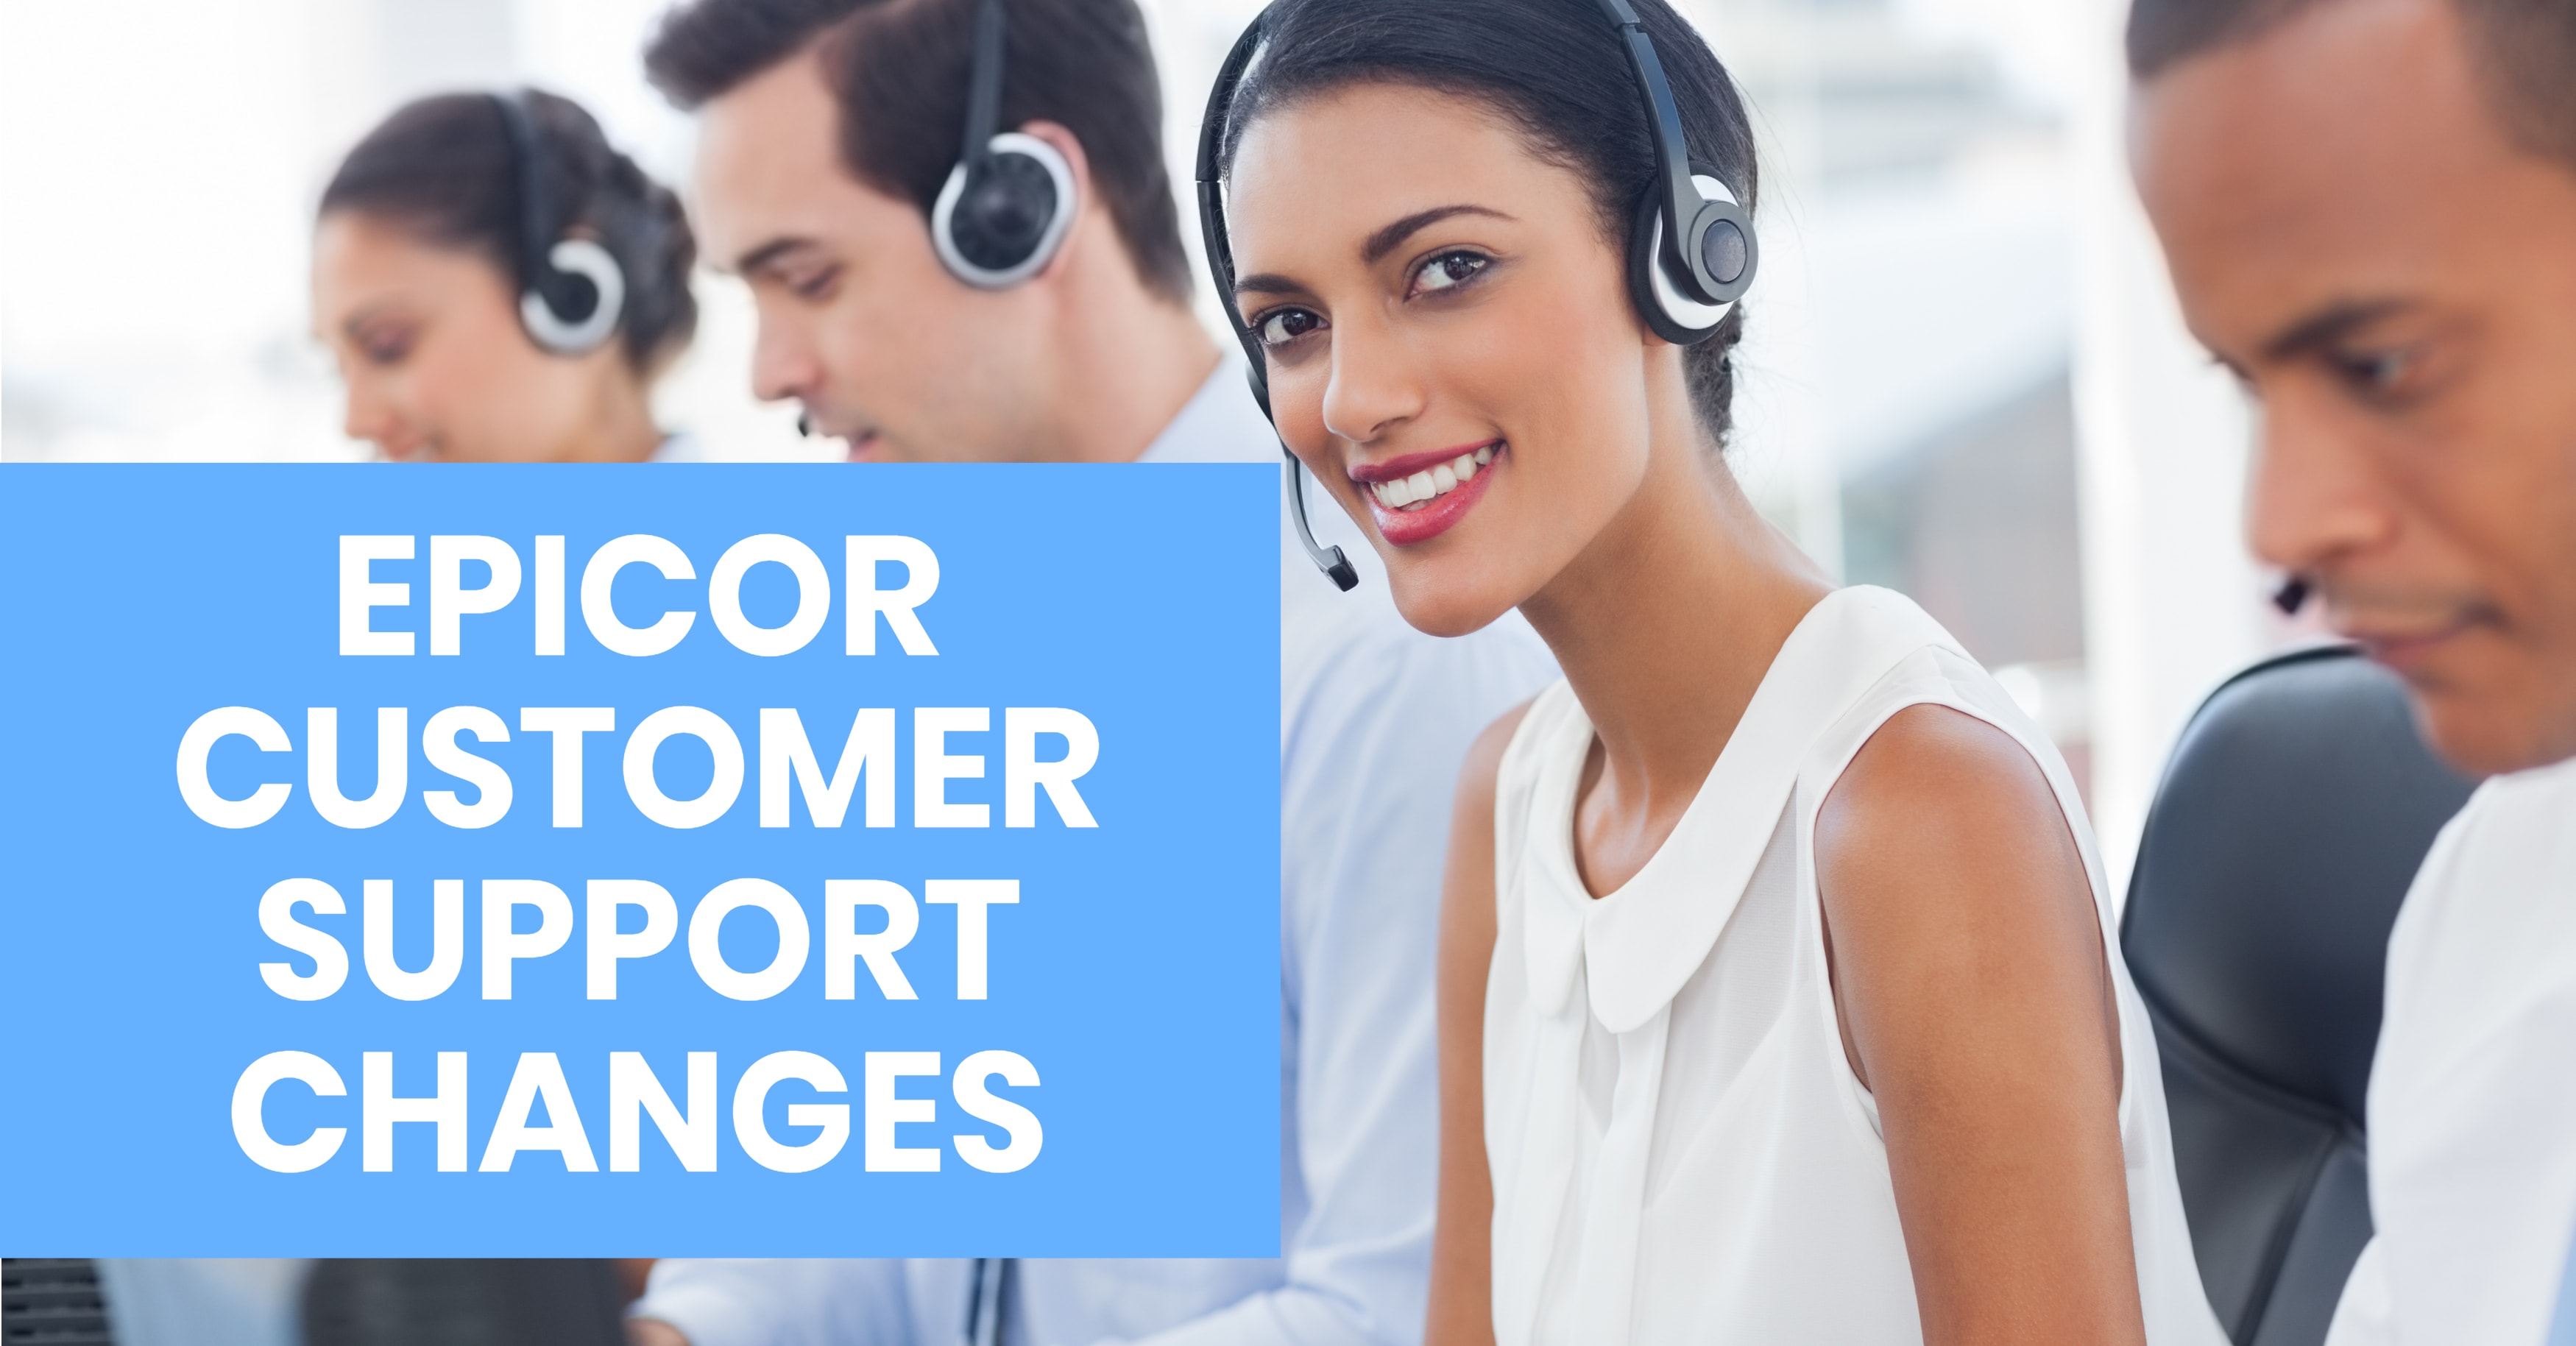 Epicor Customer Support Policy